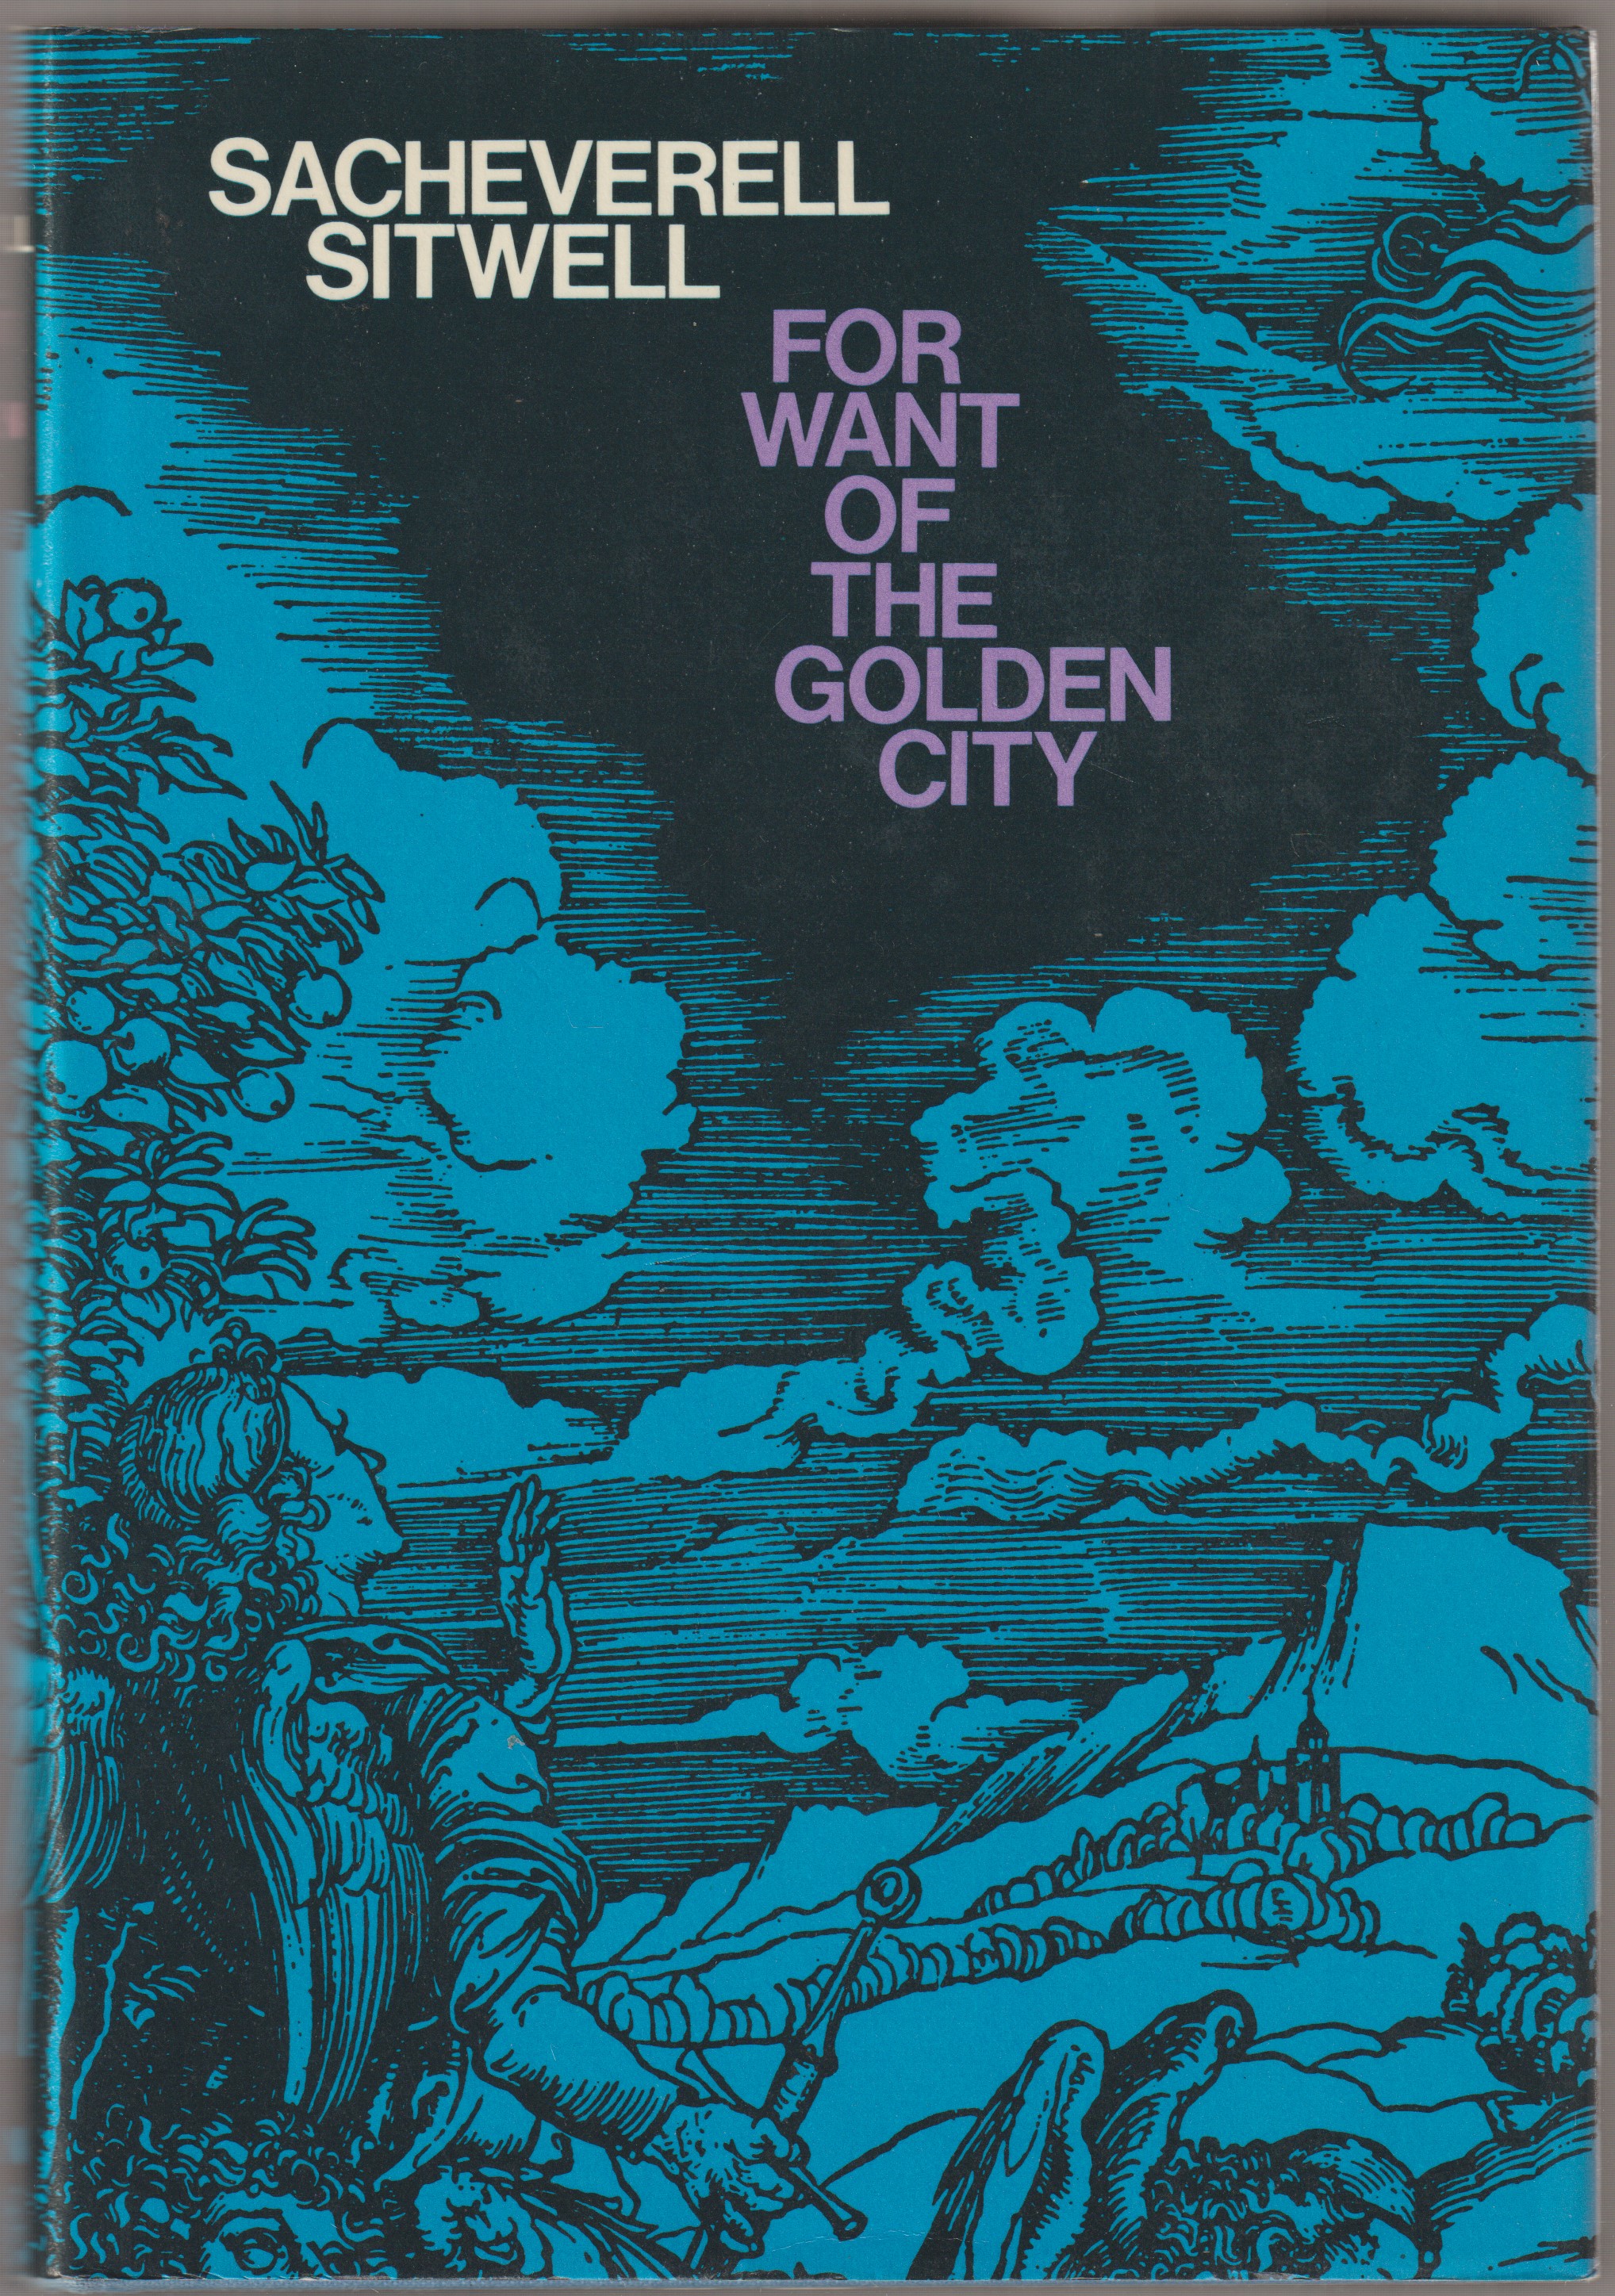 For want of the golden city